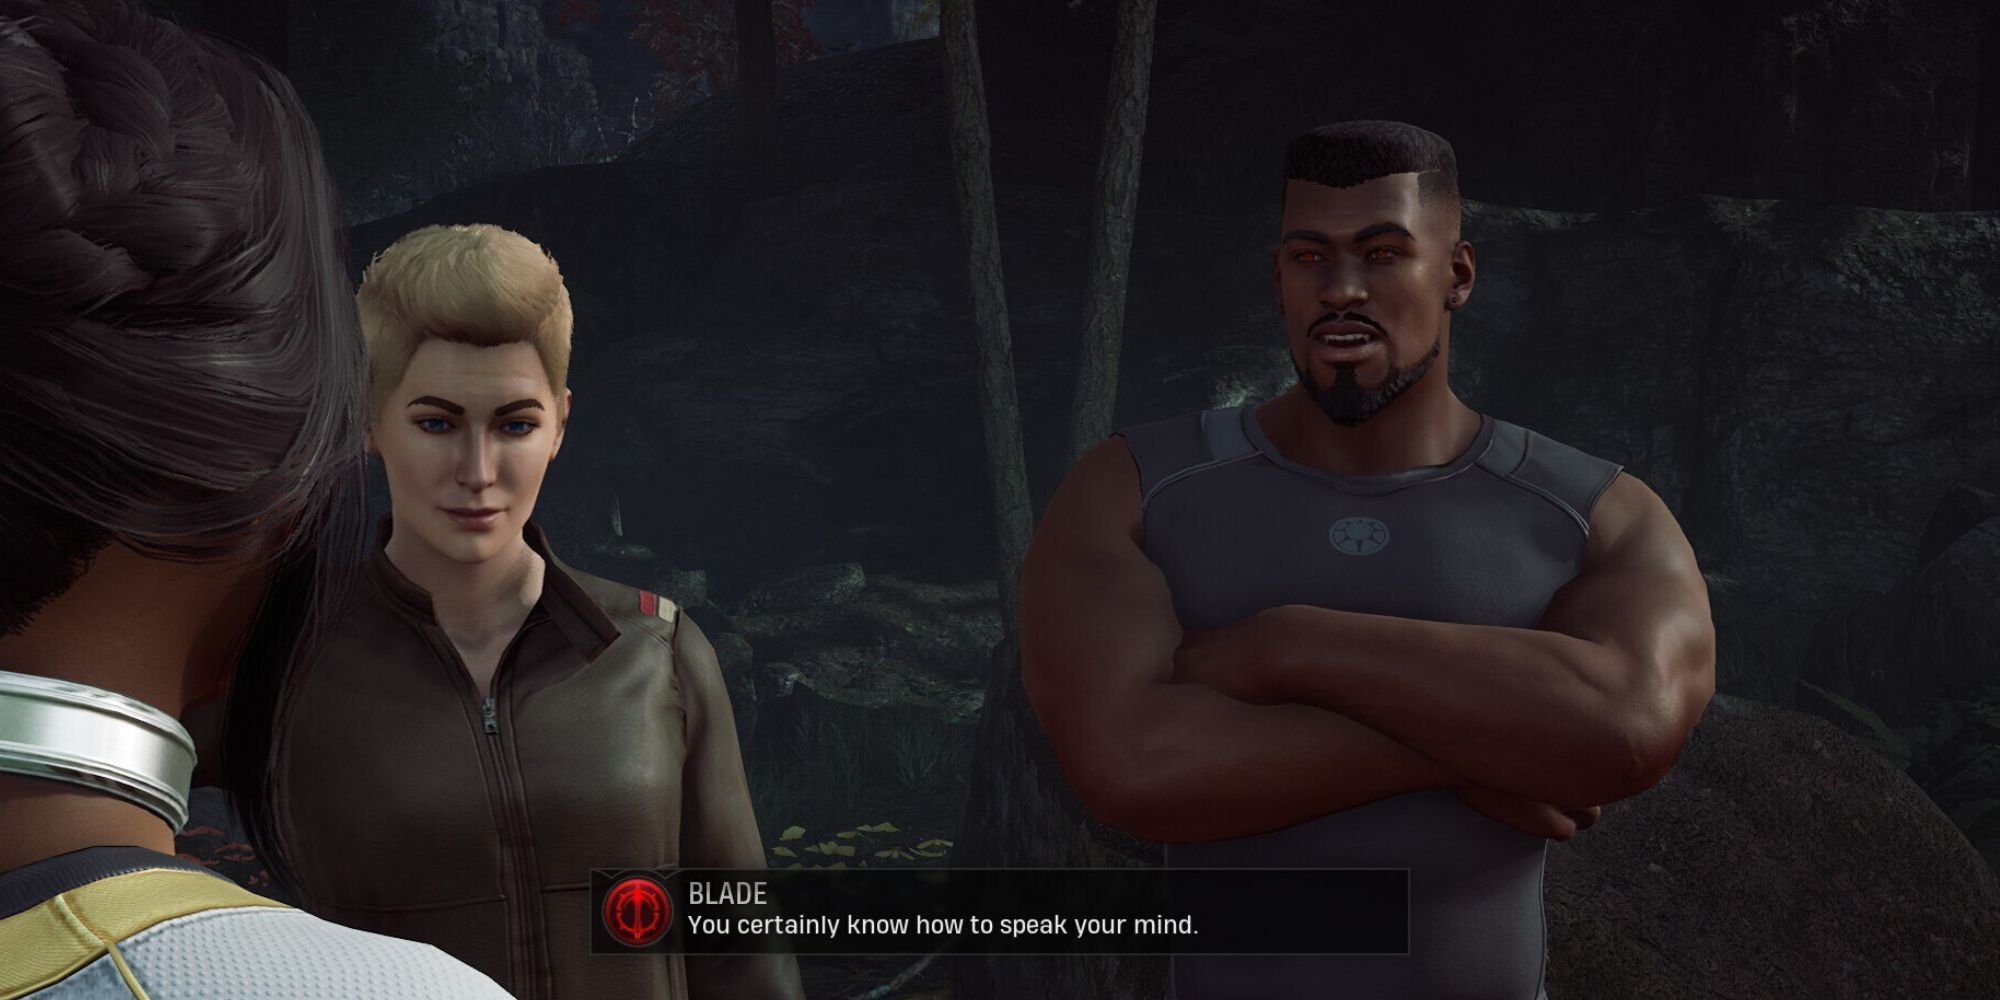 Carol and Blade talking to Hunter at the end of a meeting that was called.